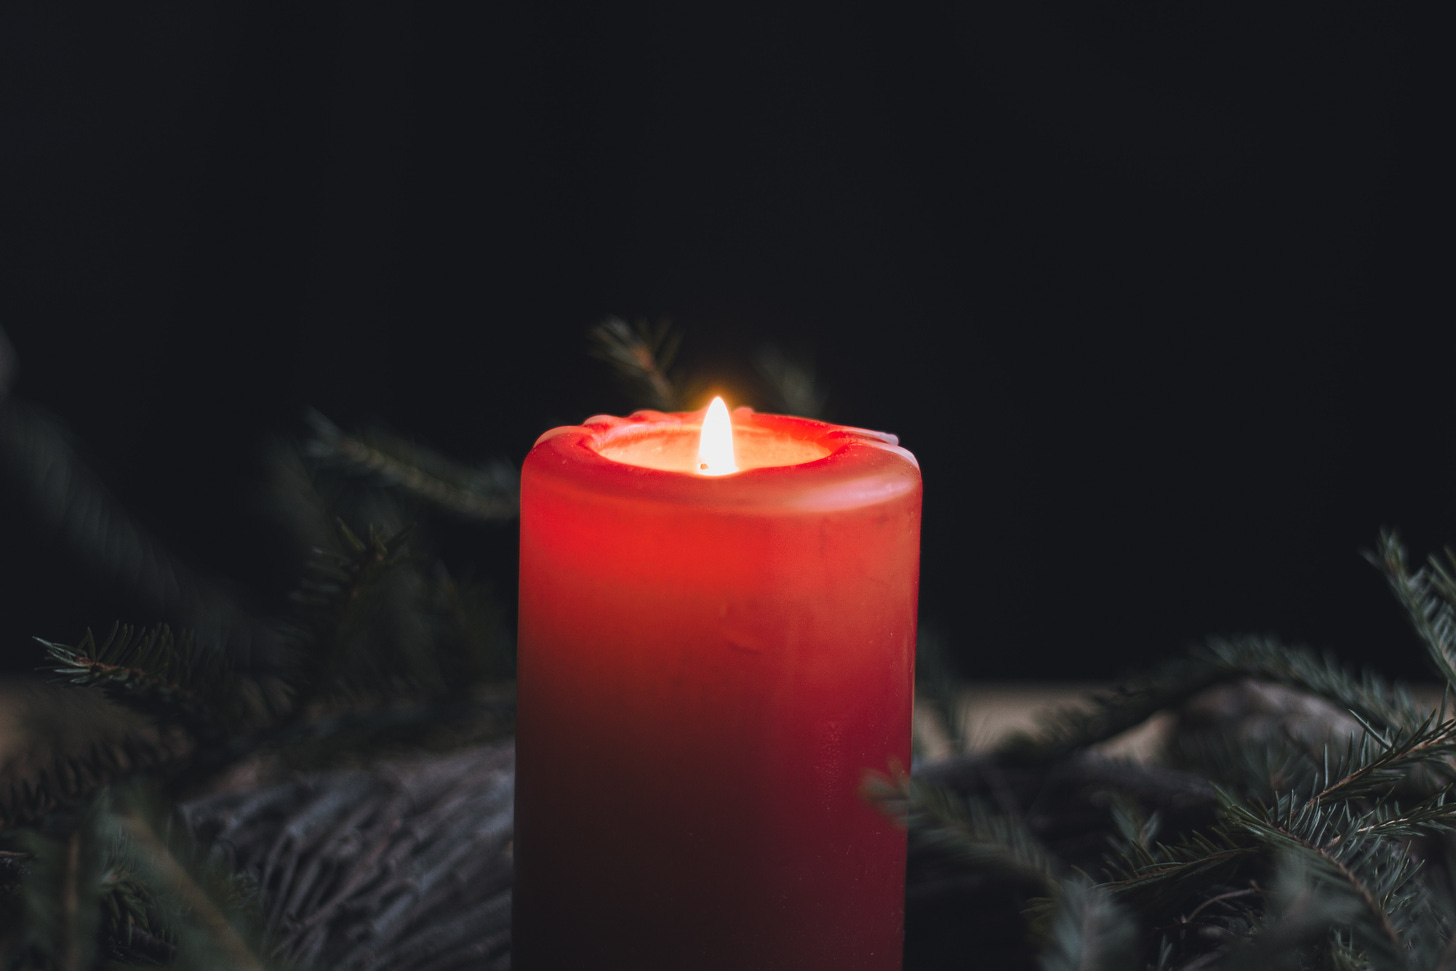 An illuminated red candle is at the centre of the image surrounded by fir tree branches against a black background.